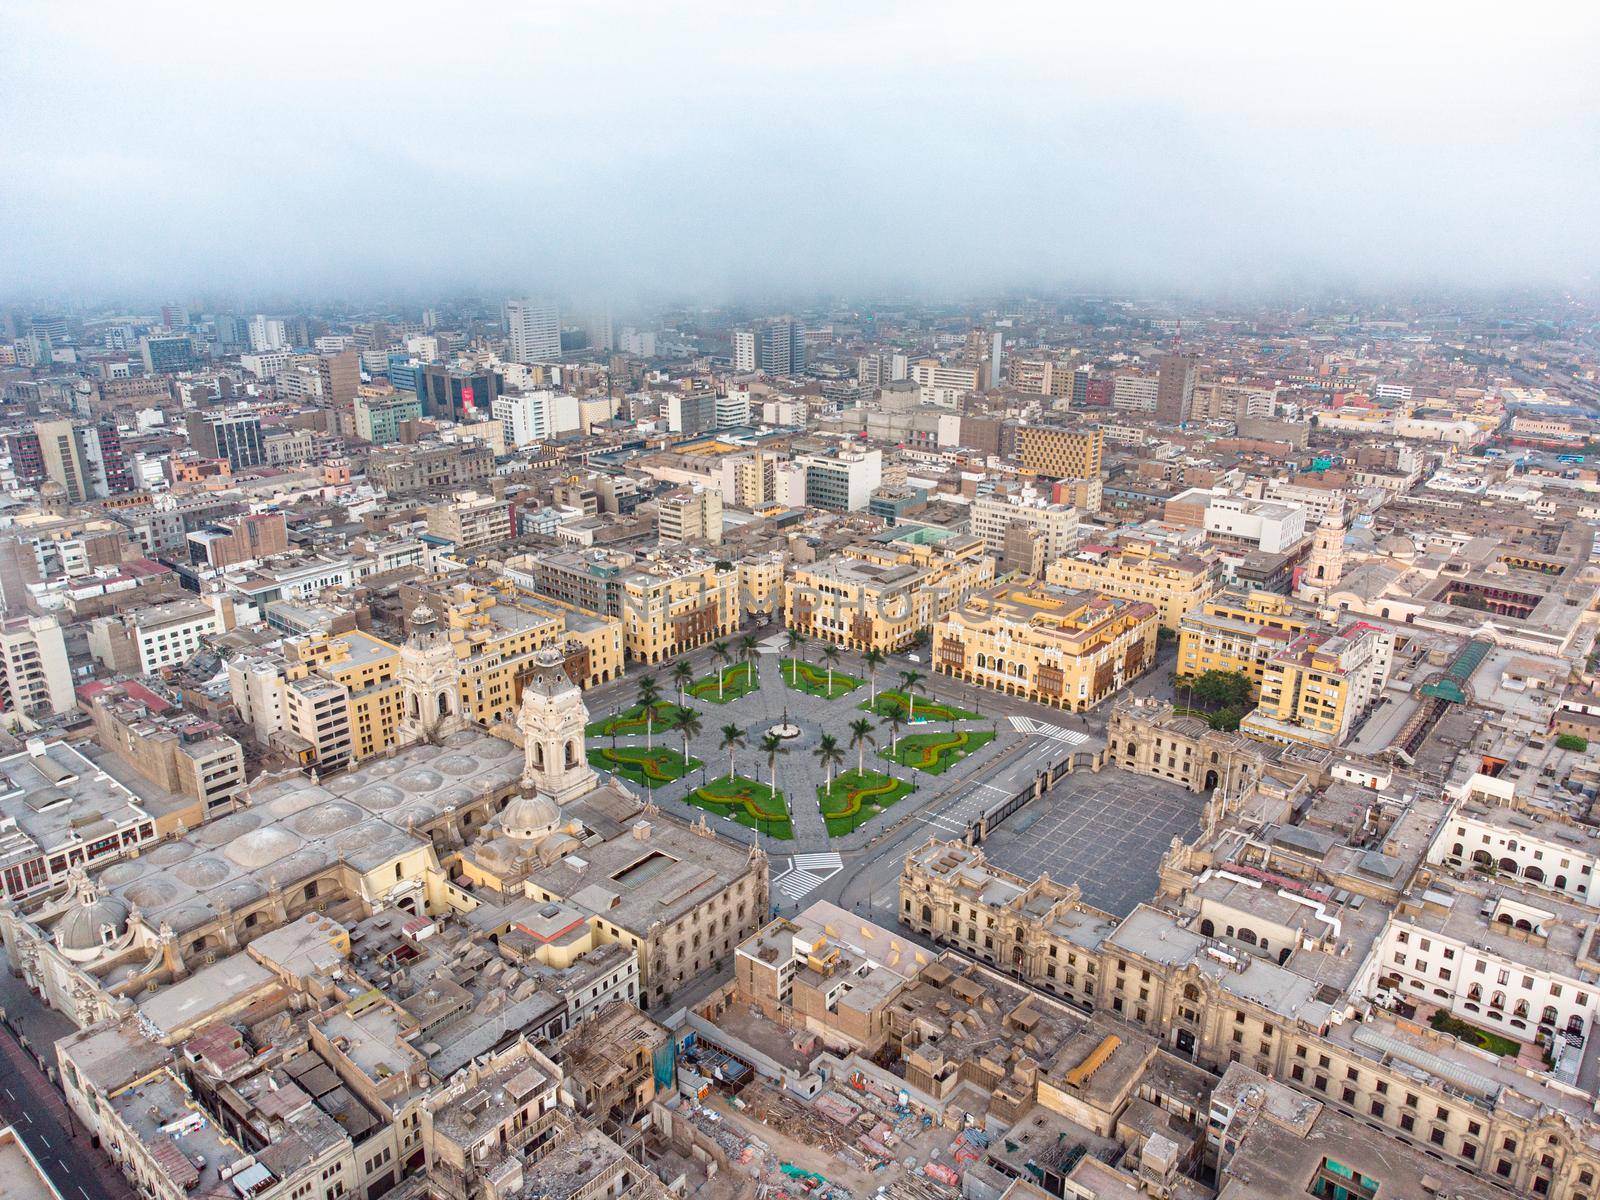 Aerial view of Lima main square, government palace of Peru and cathedral church. Historic center of capital of Peru. by Peruphotoart